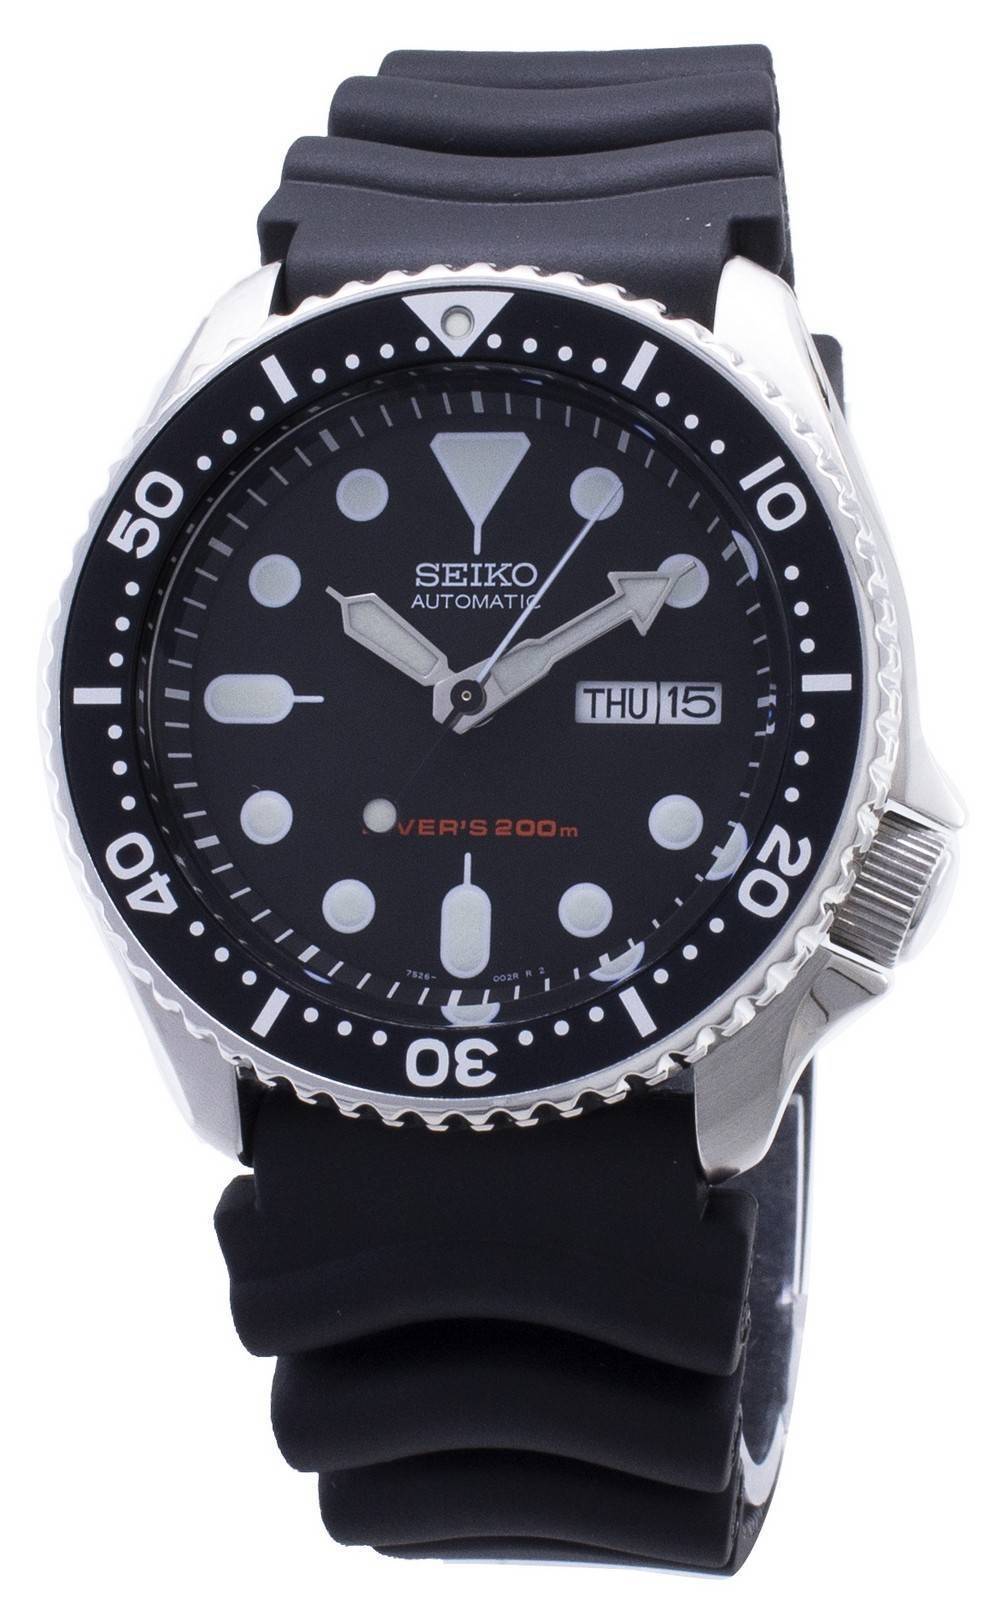 Top 51+ imagen seiko skx watches for sale